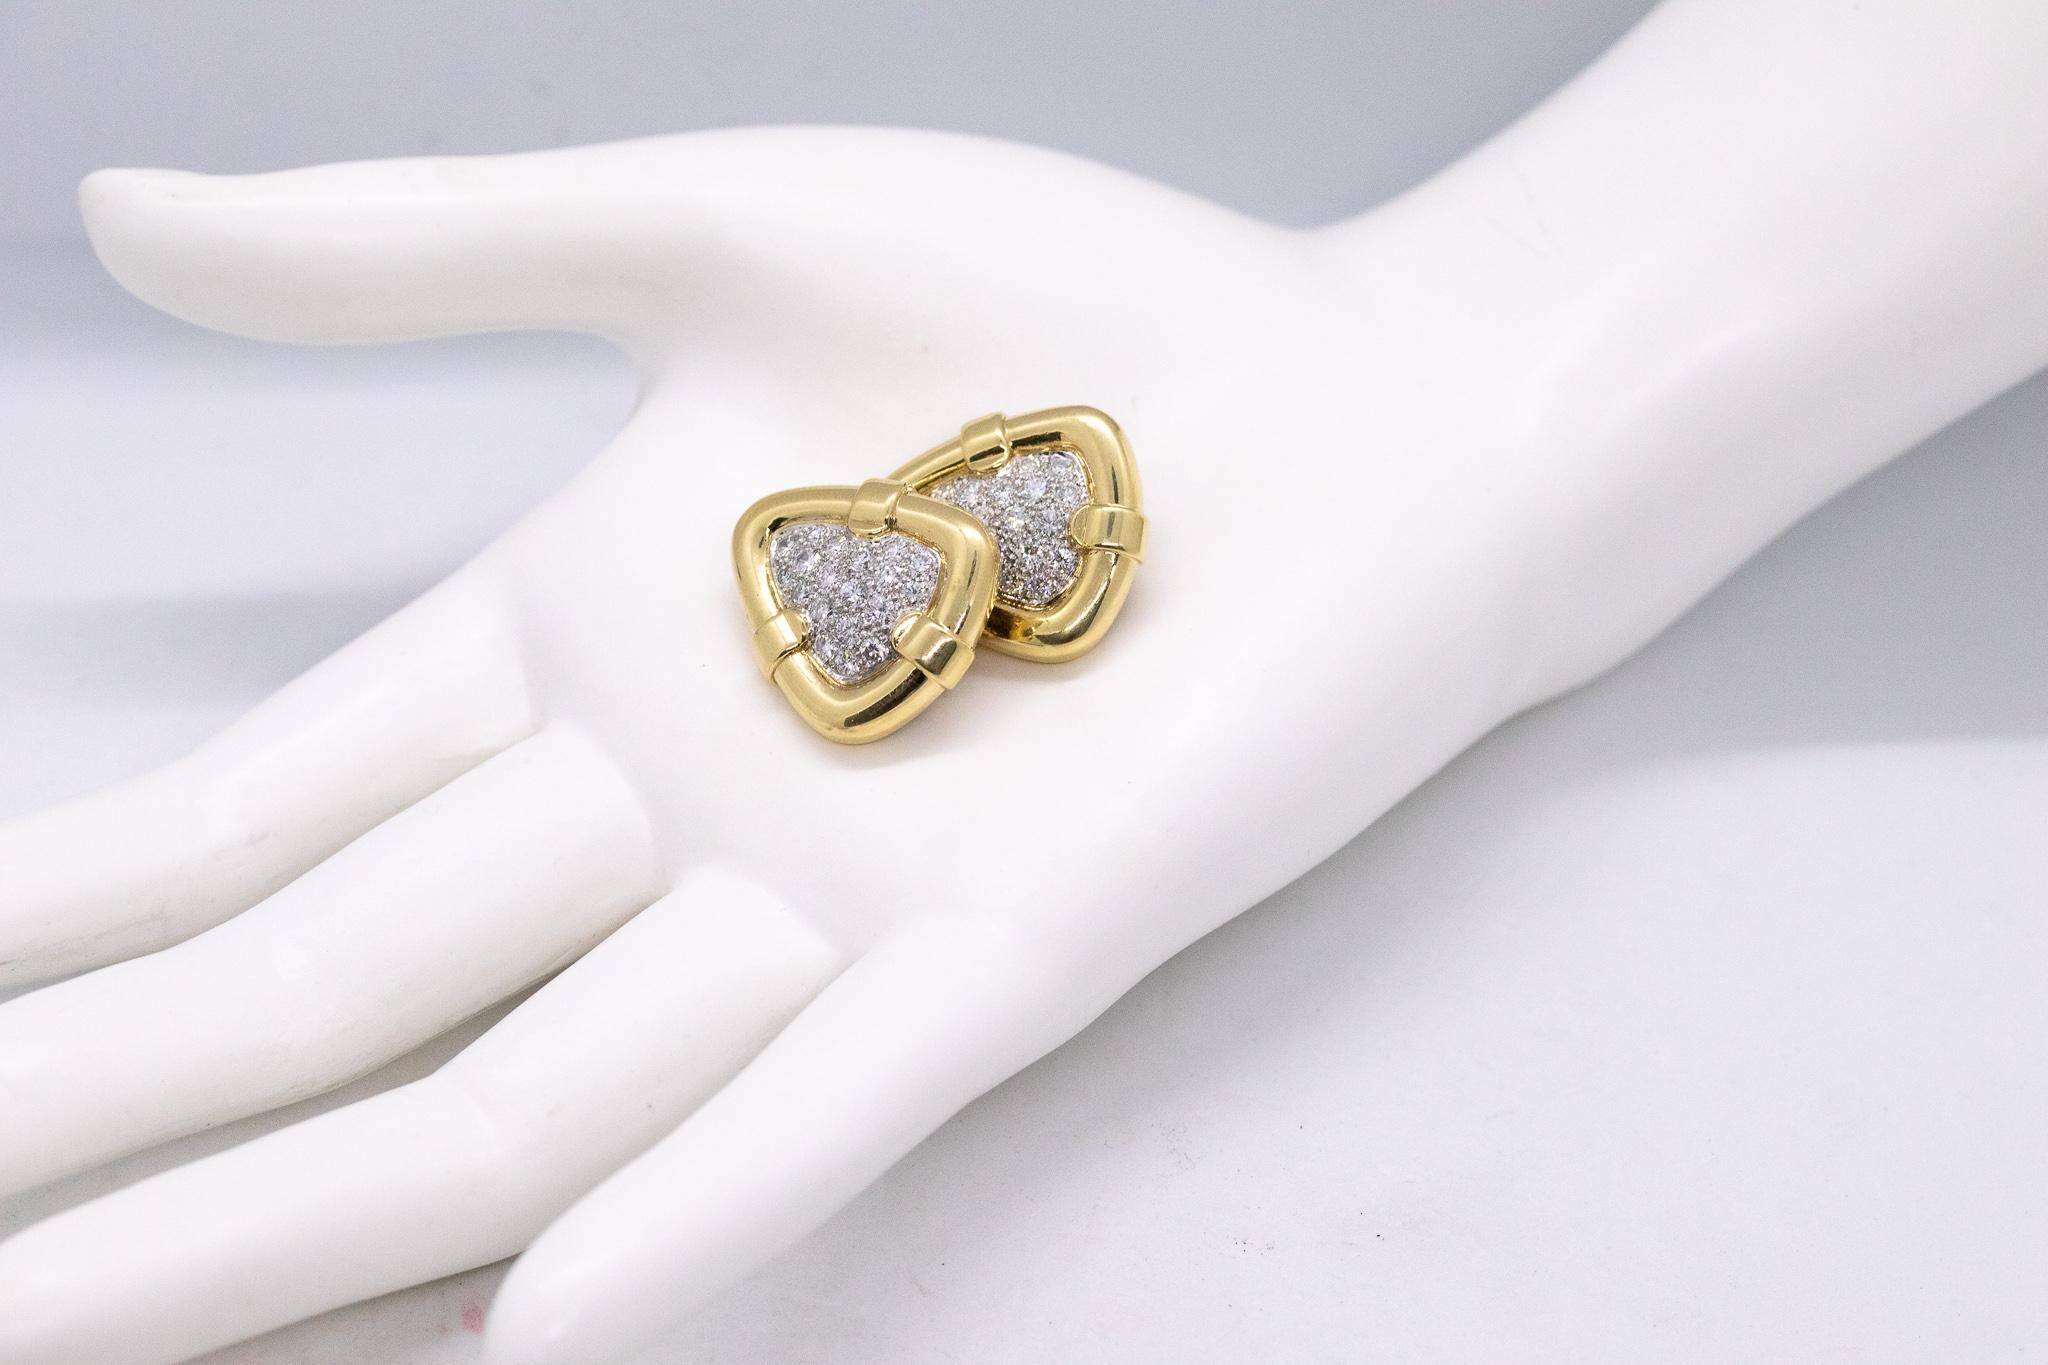 Rare pair of Clips Earrings designed by Tiffany & Co.

Exceptional pair, created in New York city at the Tiffany Studios back in the 1970's. These clips-earrings has been crafted in a trillion triangle shape in solid yellow and white gold of 18